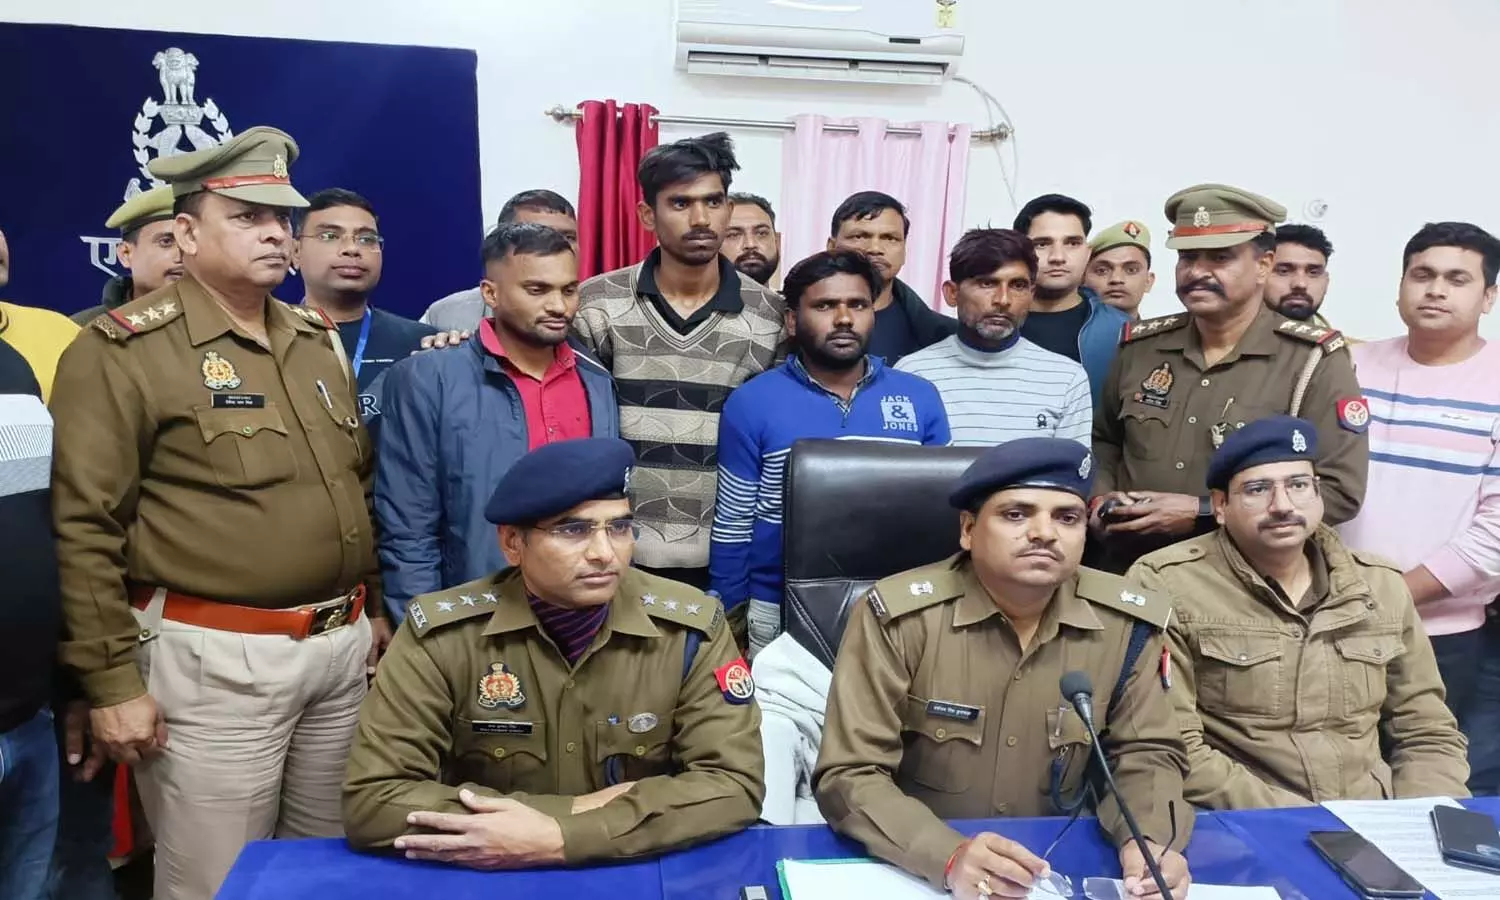 Etah police revealed 5 incidents of robbery and snatching that happened in three police station areas